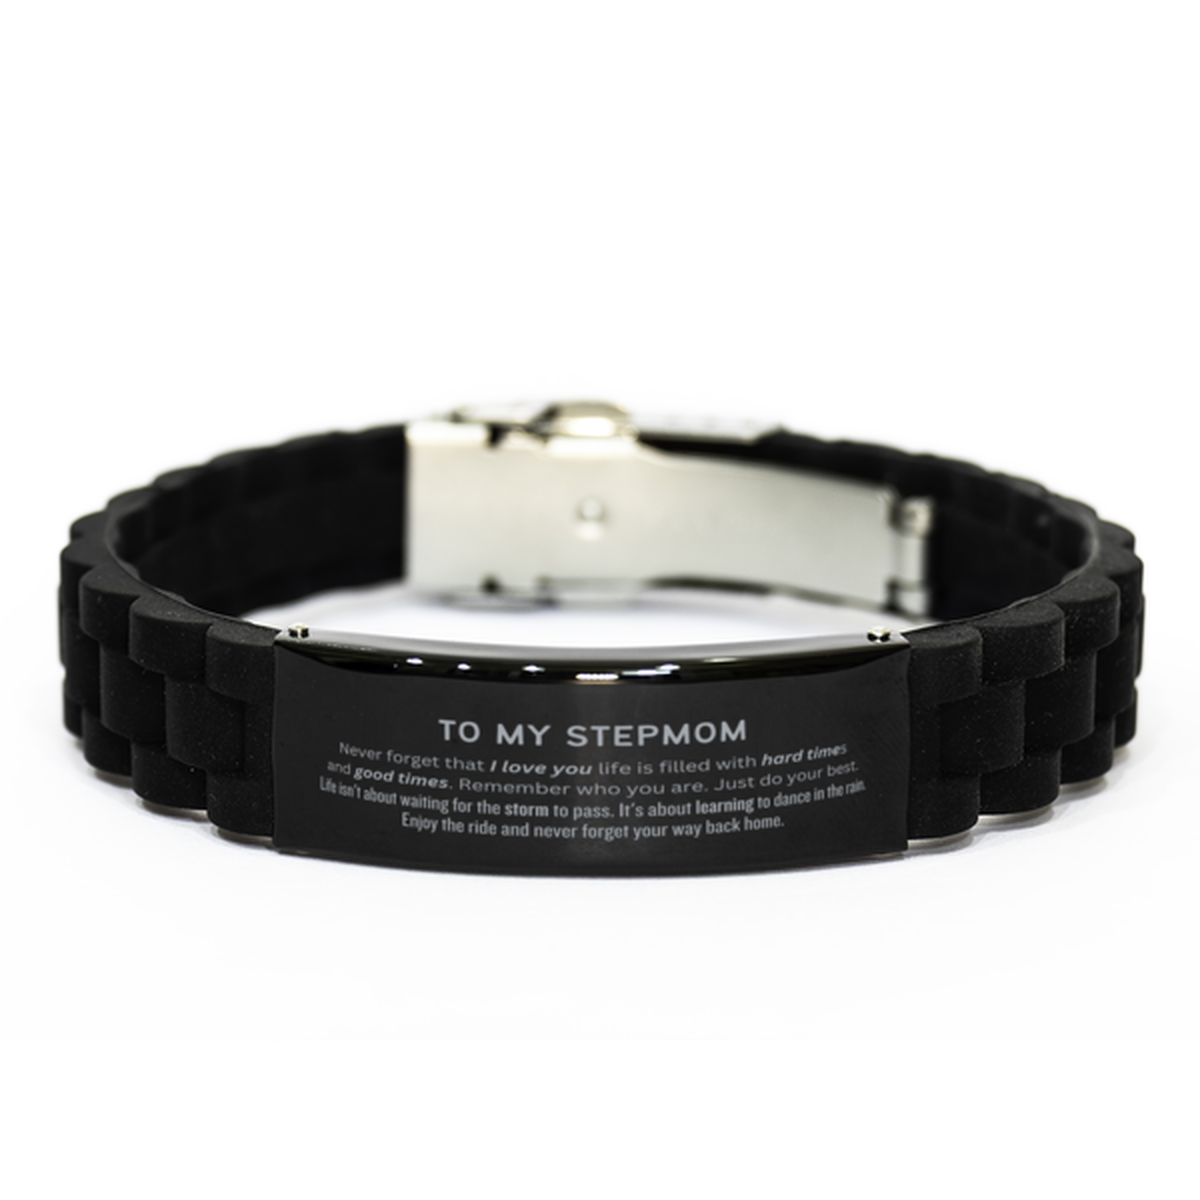 Christmas Stepmom Black Glidelock Clasp Bracelet Gifts, To My Stepmom Birthday Thank You Gifts For Stepmom, Graduation Unique Gifts For Stepmom To My Stepmom Never forget that I love you life is filled with hard times and good times. Remember who you are.